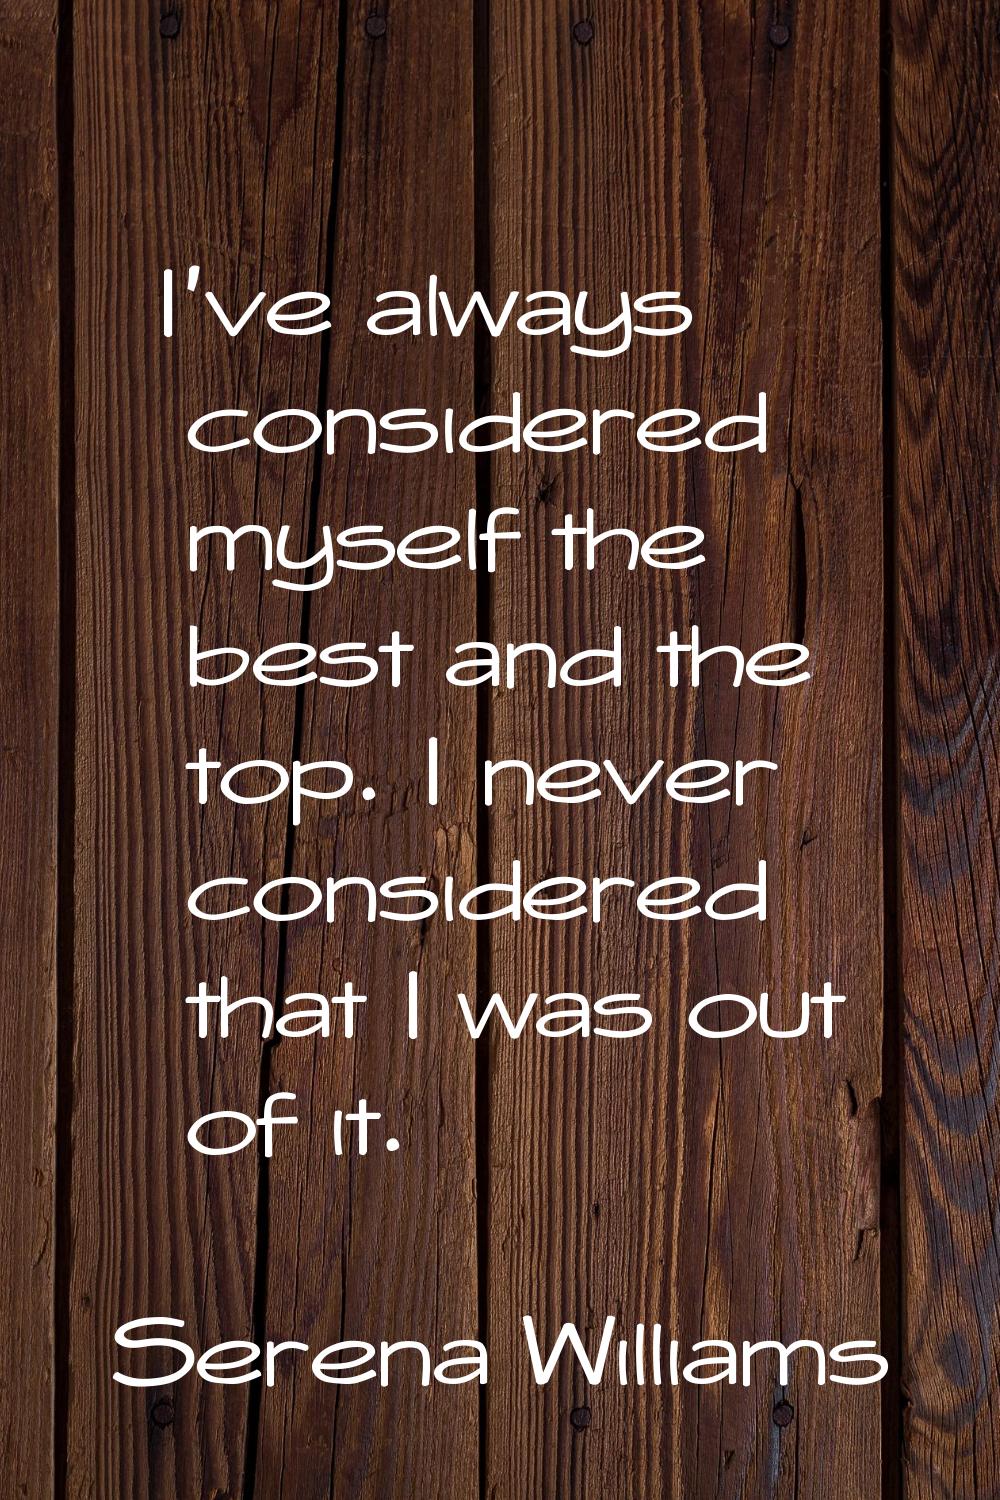 I've always considered myself the best and the top. I never considered that I was out of it.